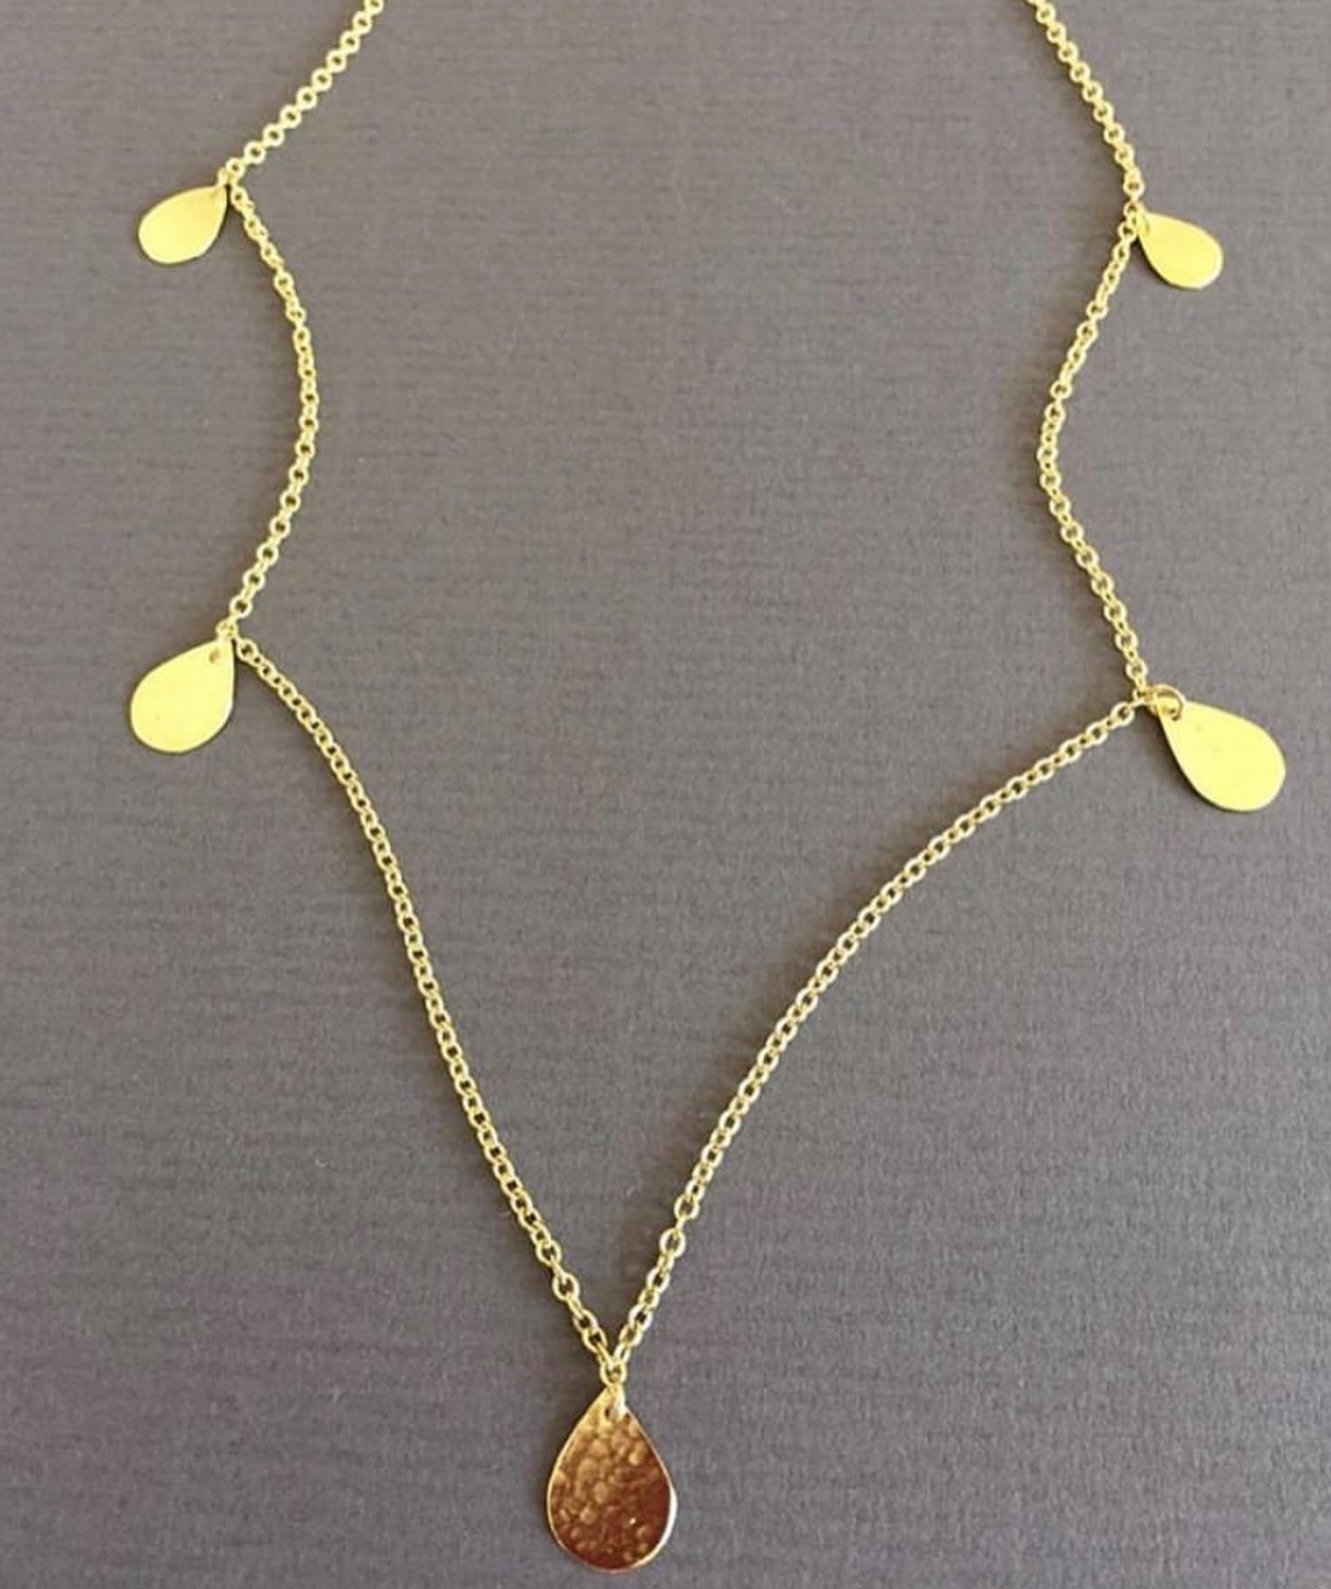 My petal necklace &hellip; an oldie but a goody&hellip;

Not online but available to order by the inch and have as many petals as you want &hellip;.

#gold #petalnecklace #goldenpetal #goldjewellerydesign #goldjewelry #goldjewellery